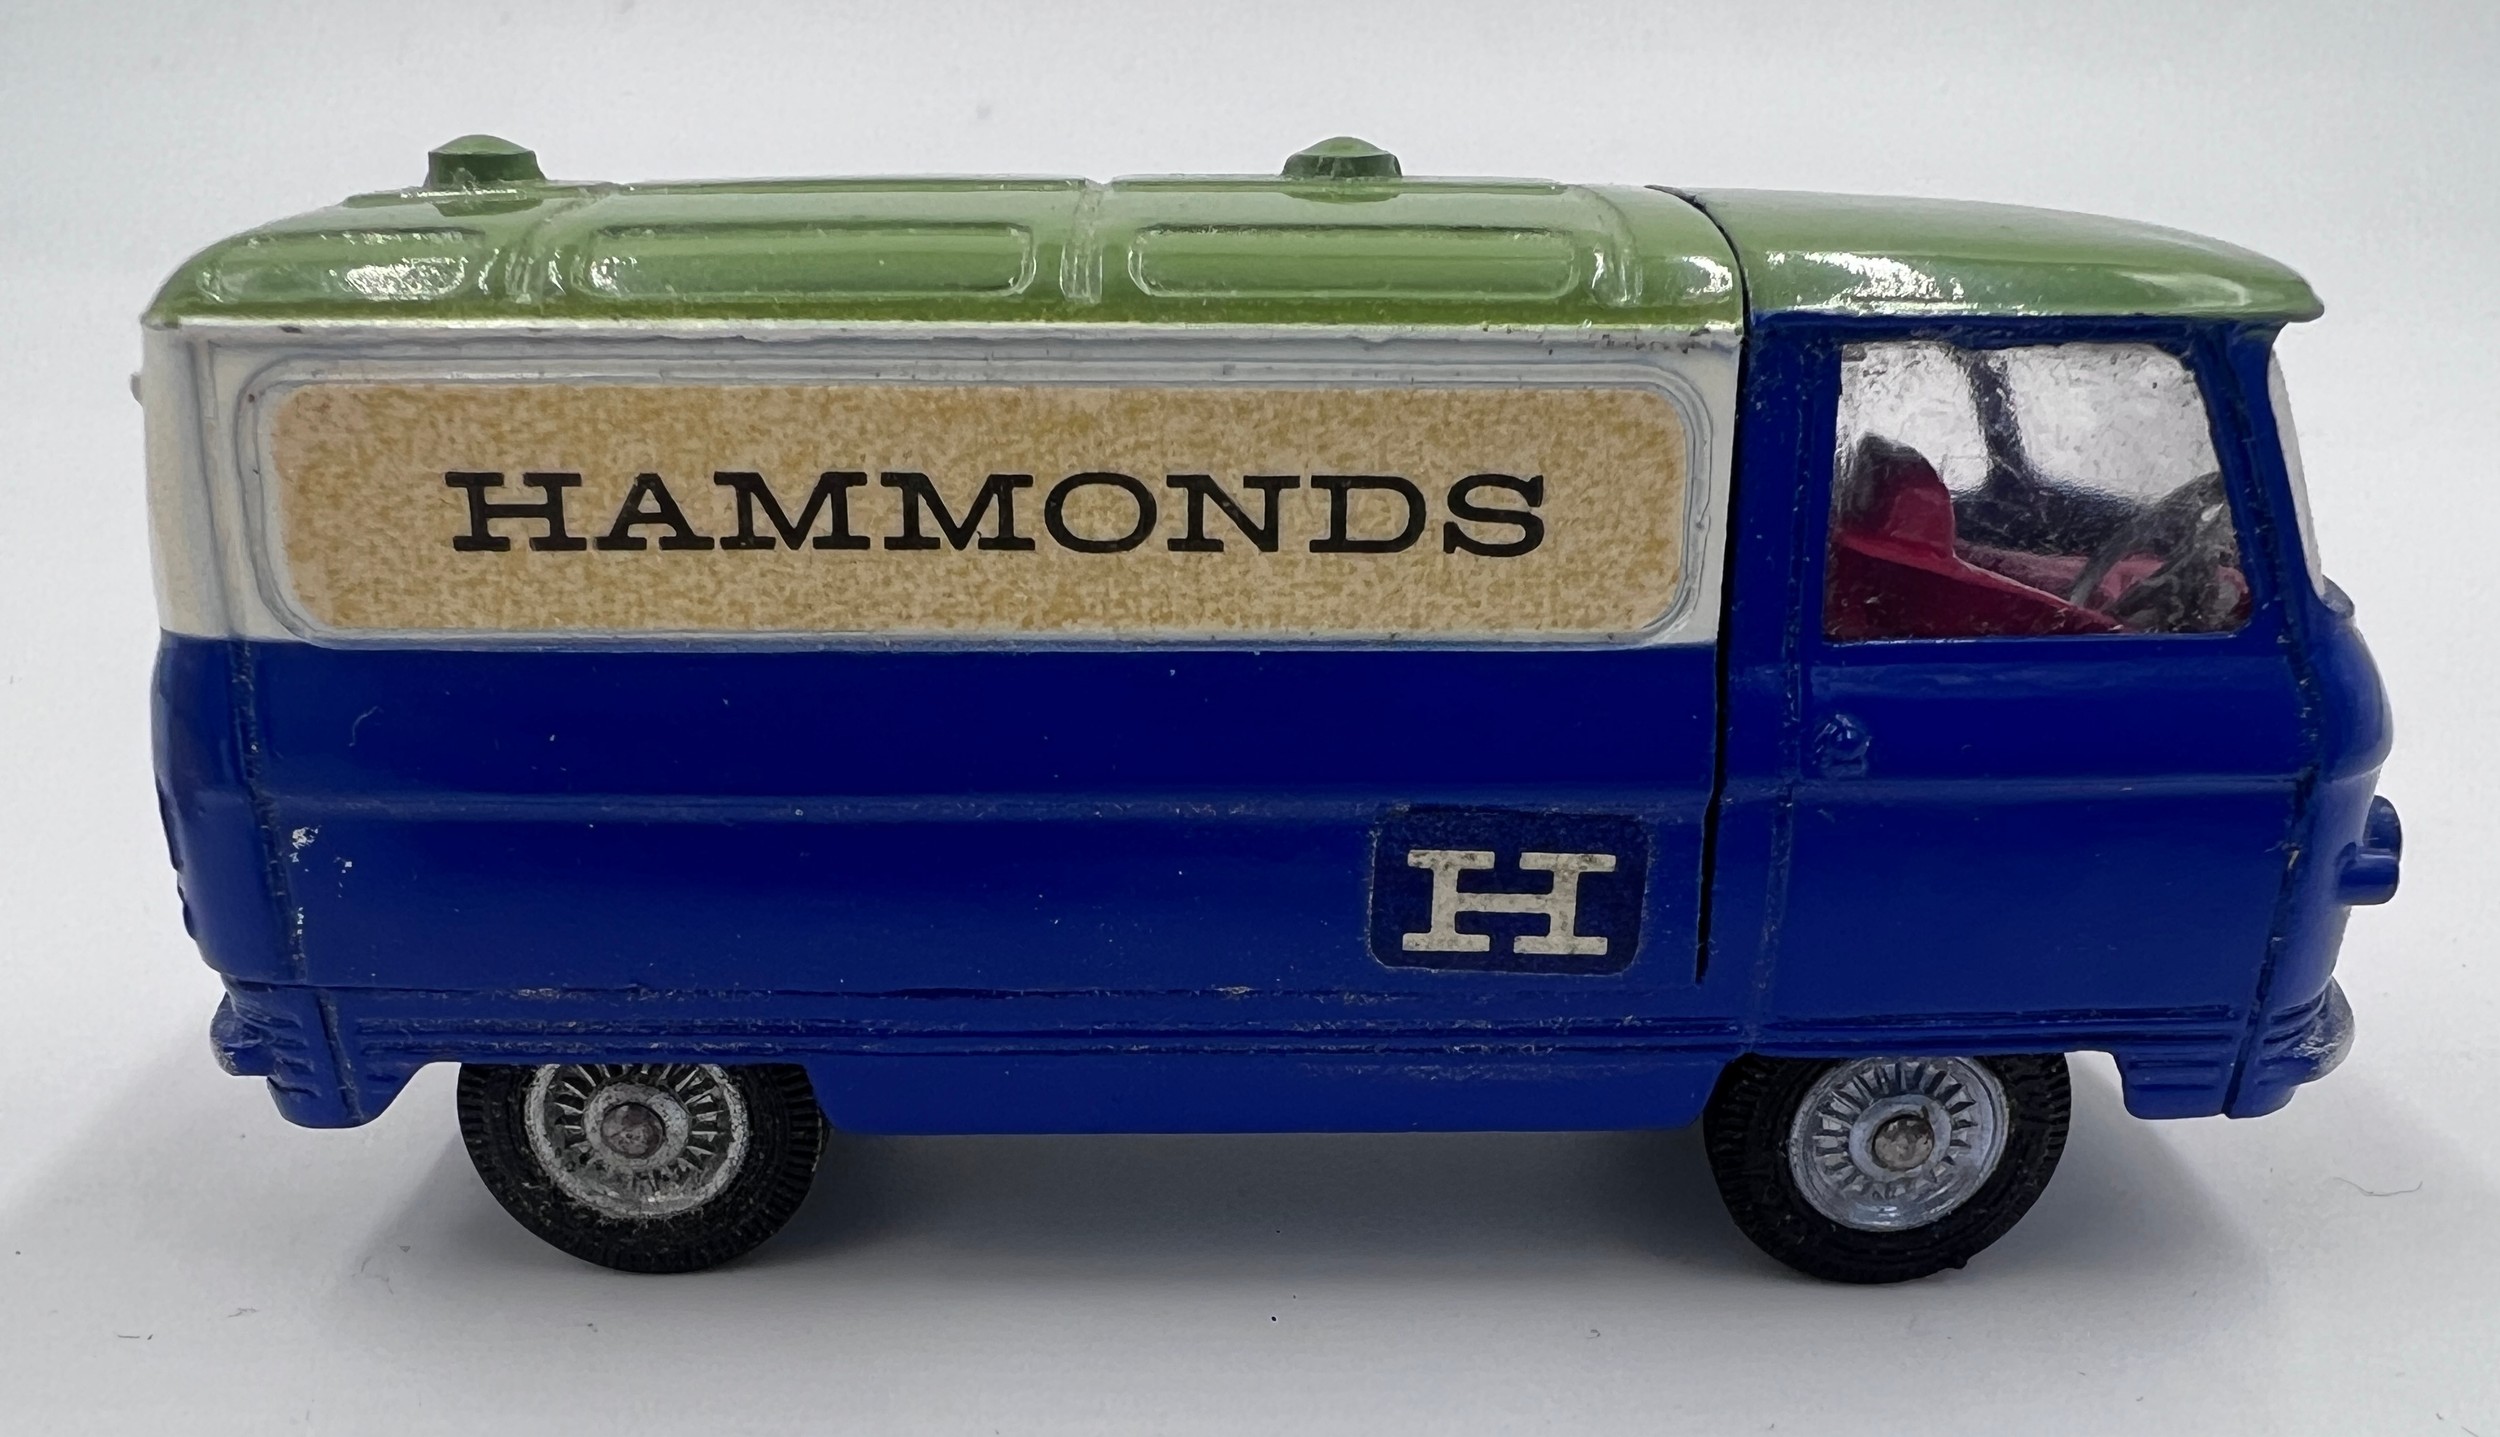 Corgi 462 Commer "Hammonds" Promotional Van in original box - finished in blue with a green roof, - Bild 2 aus 11